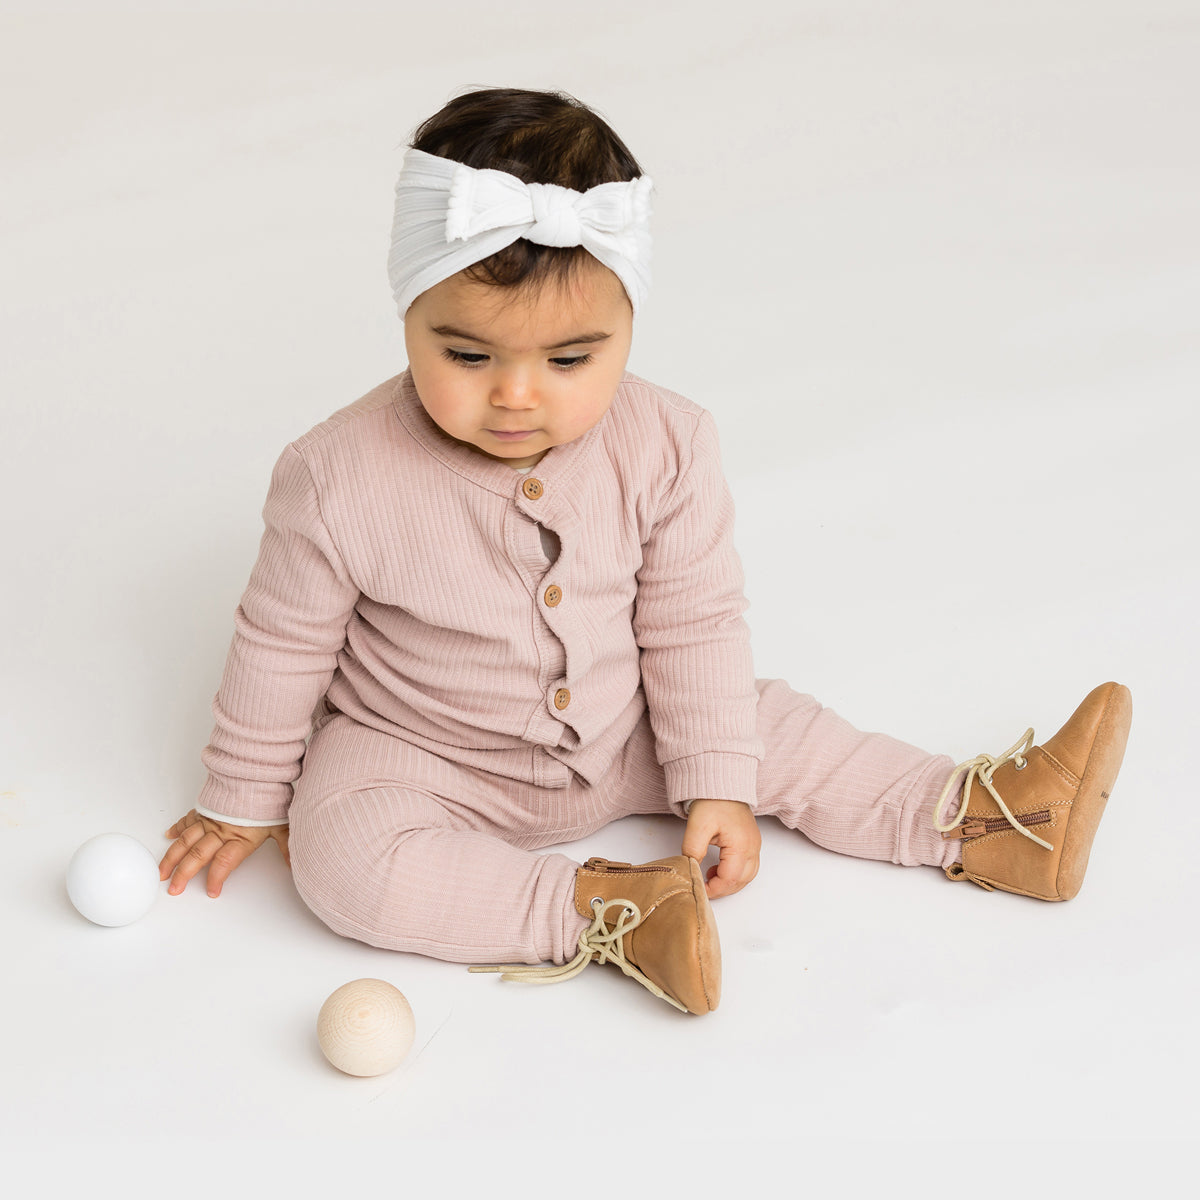 Toddler wearing Tan boots with white laces with white bow in hair